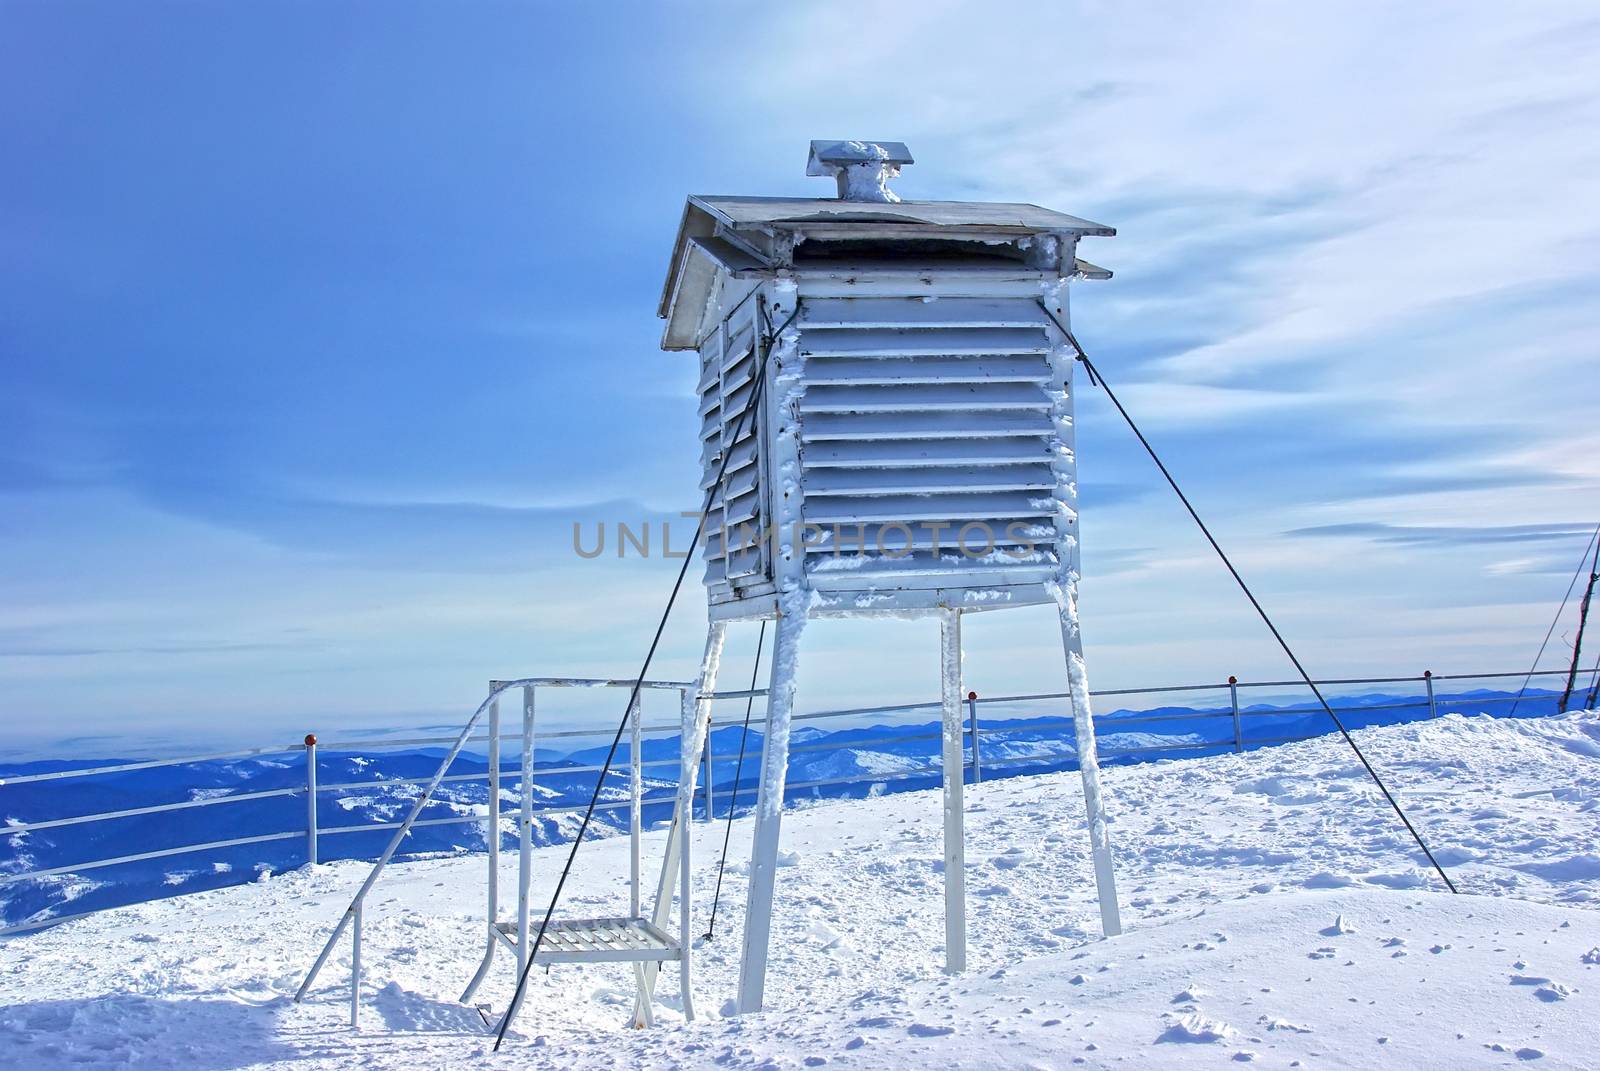 Frozen weather station by savcoco